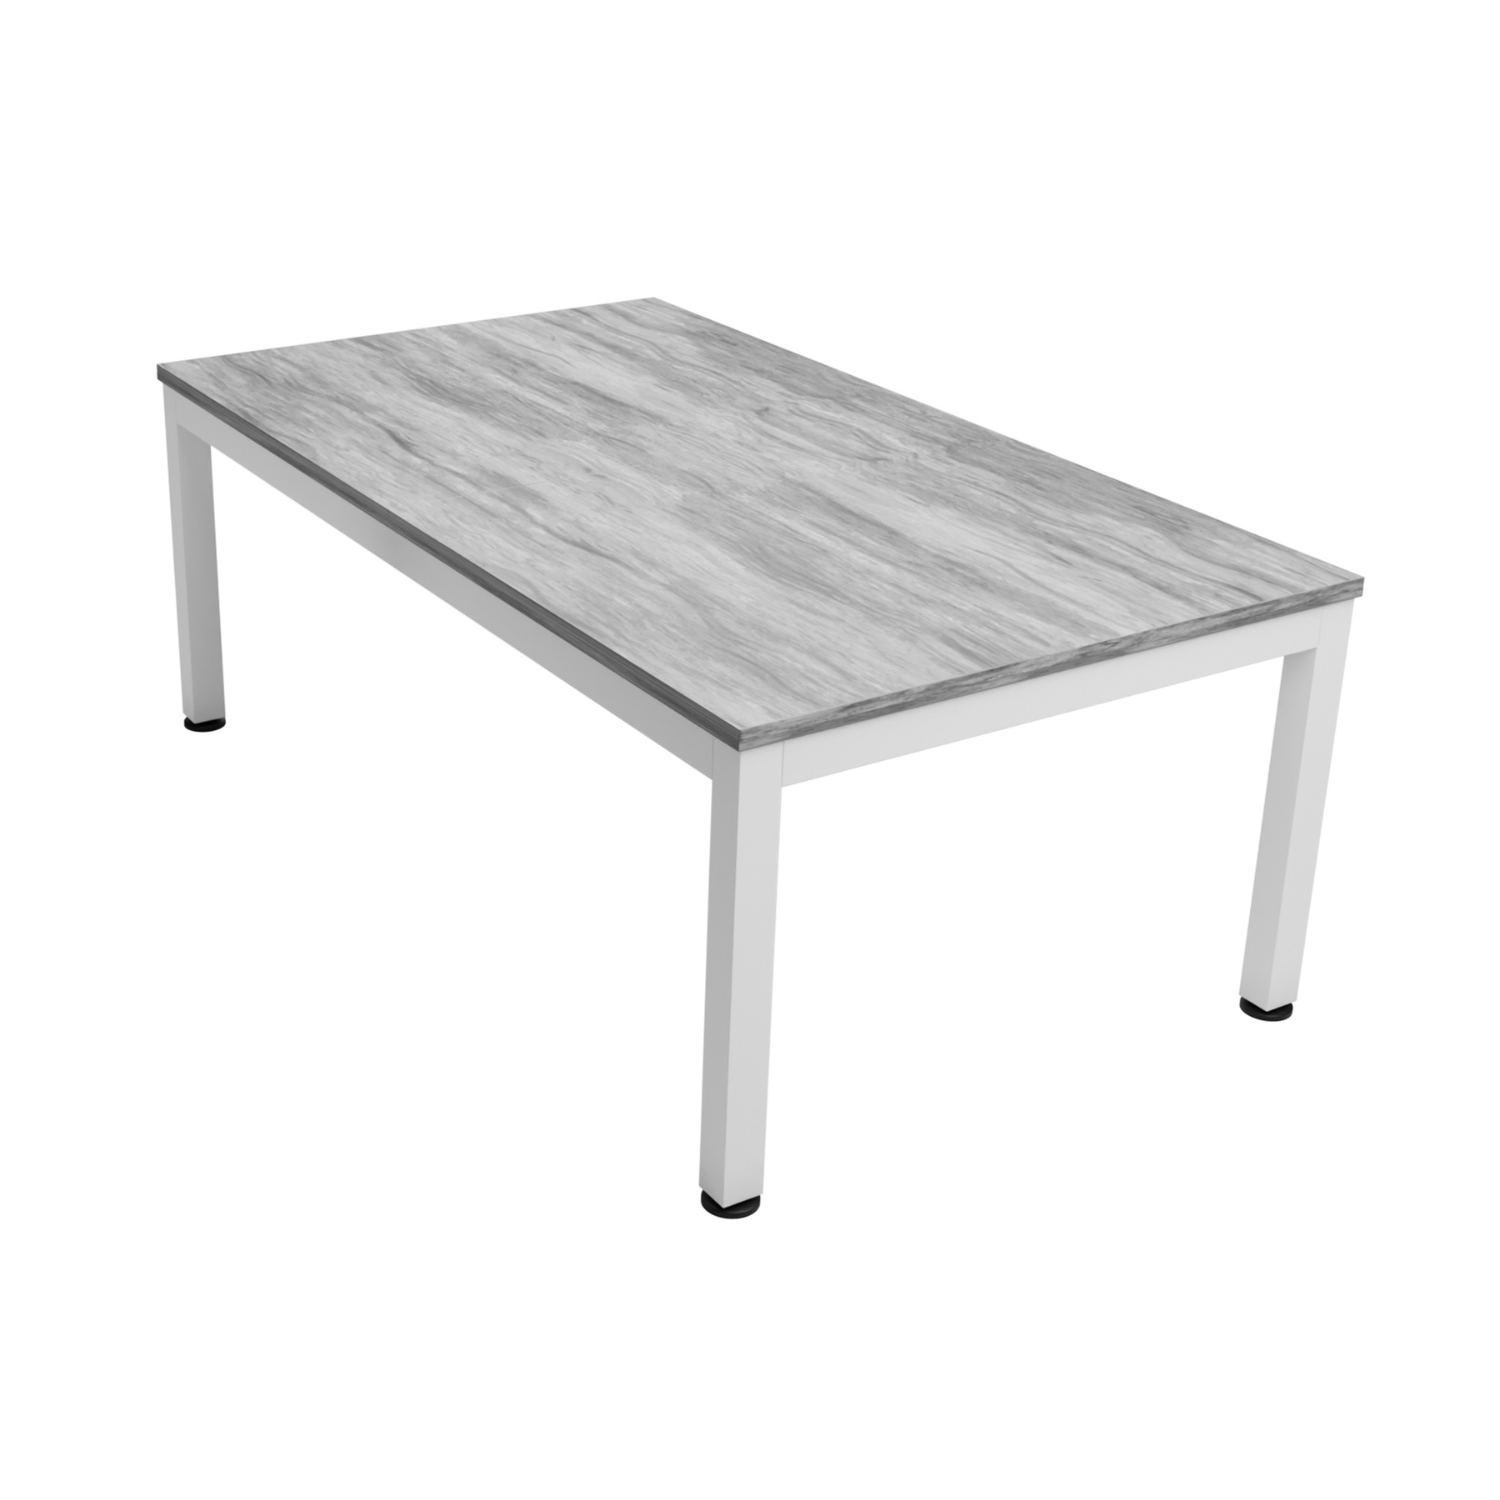 dynamic vancouver 2 america slate bed pool dining table white & grey 7ft